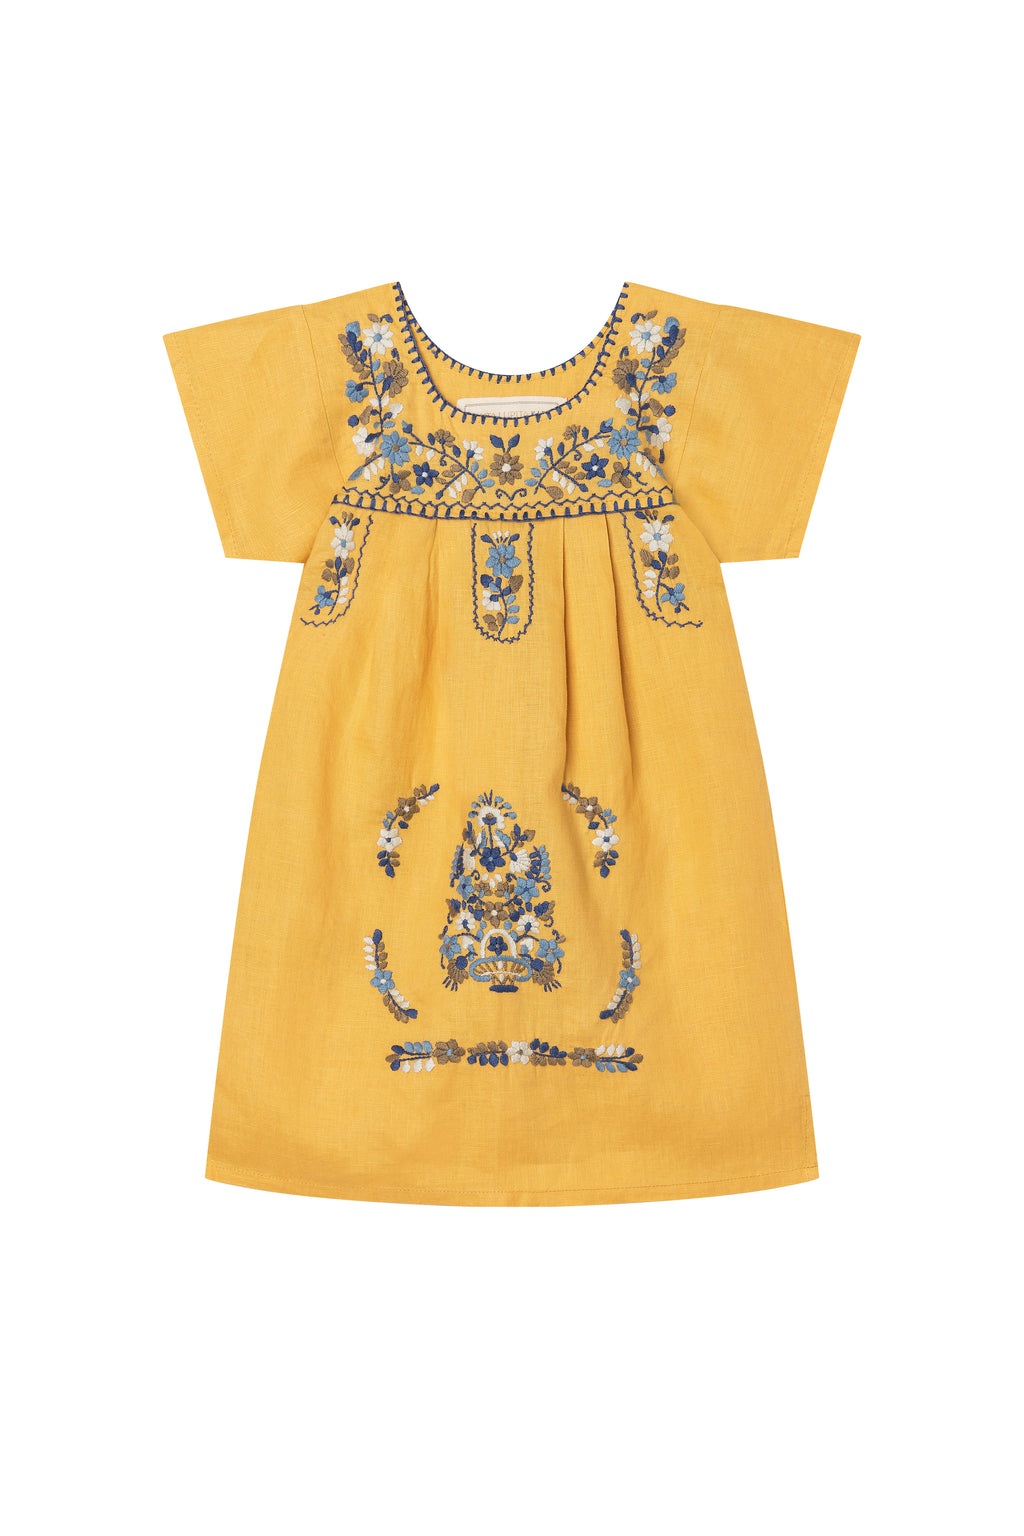 THE GIRLS CANARY DRESS